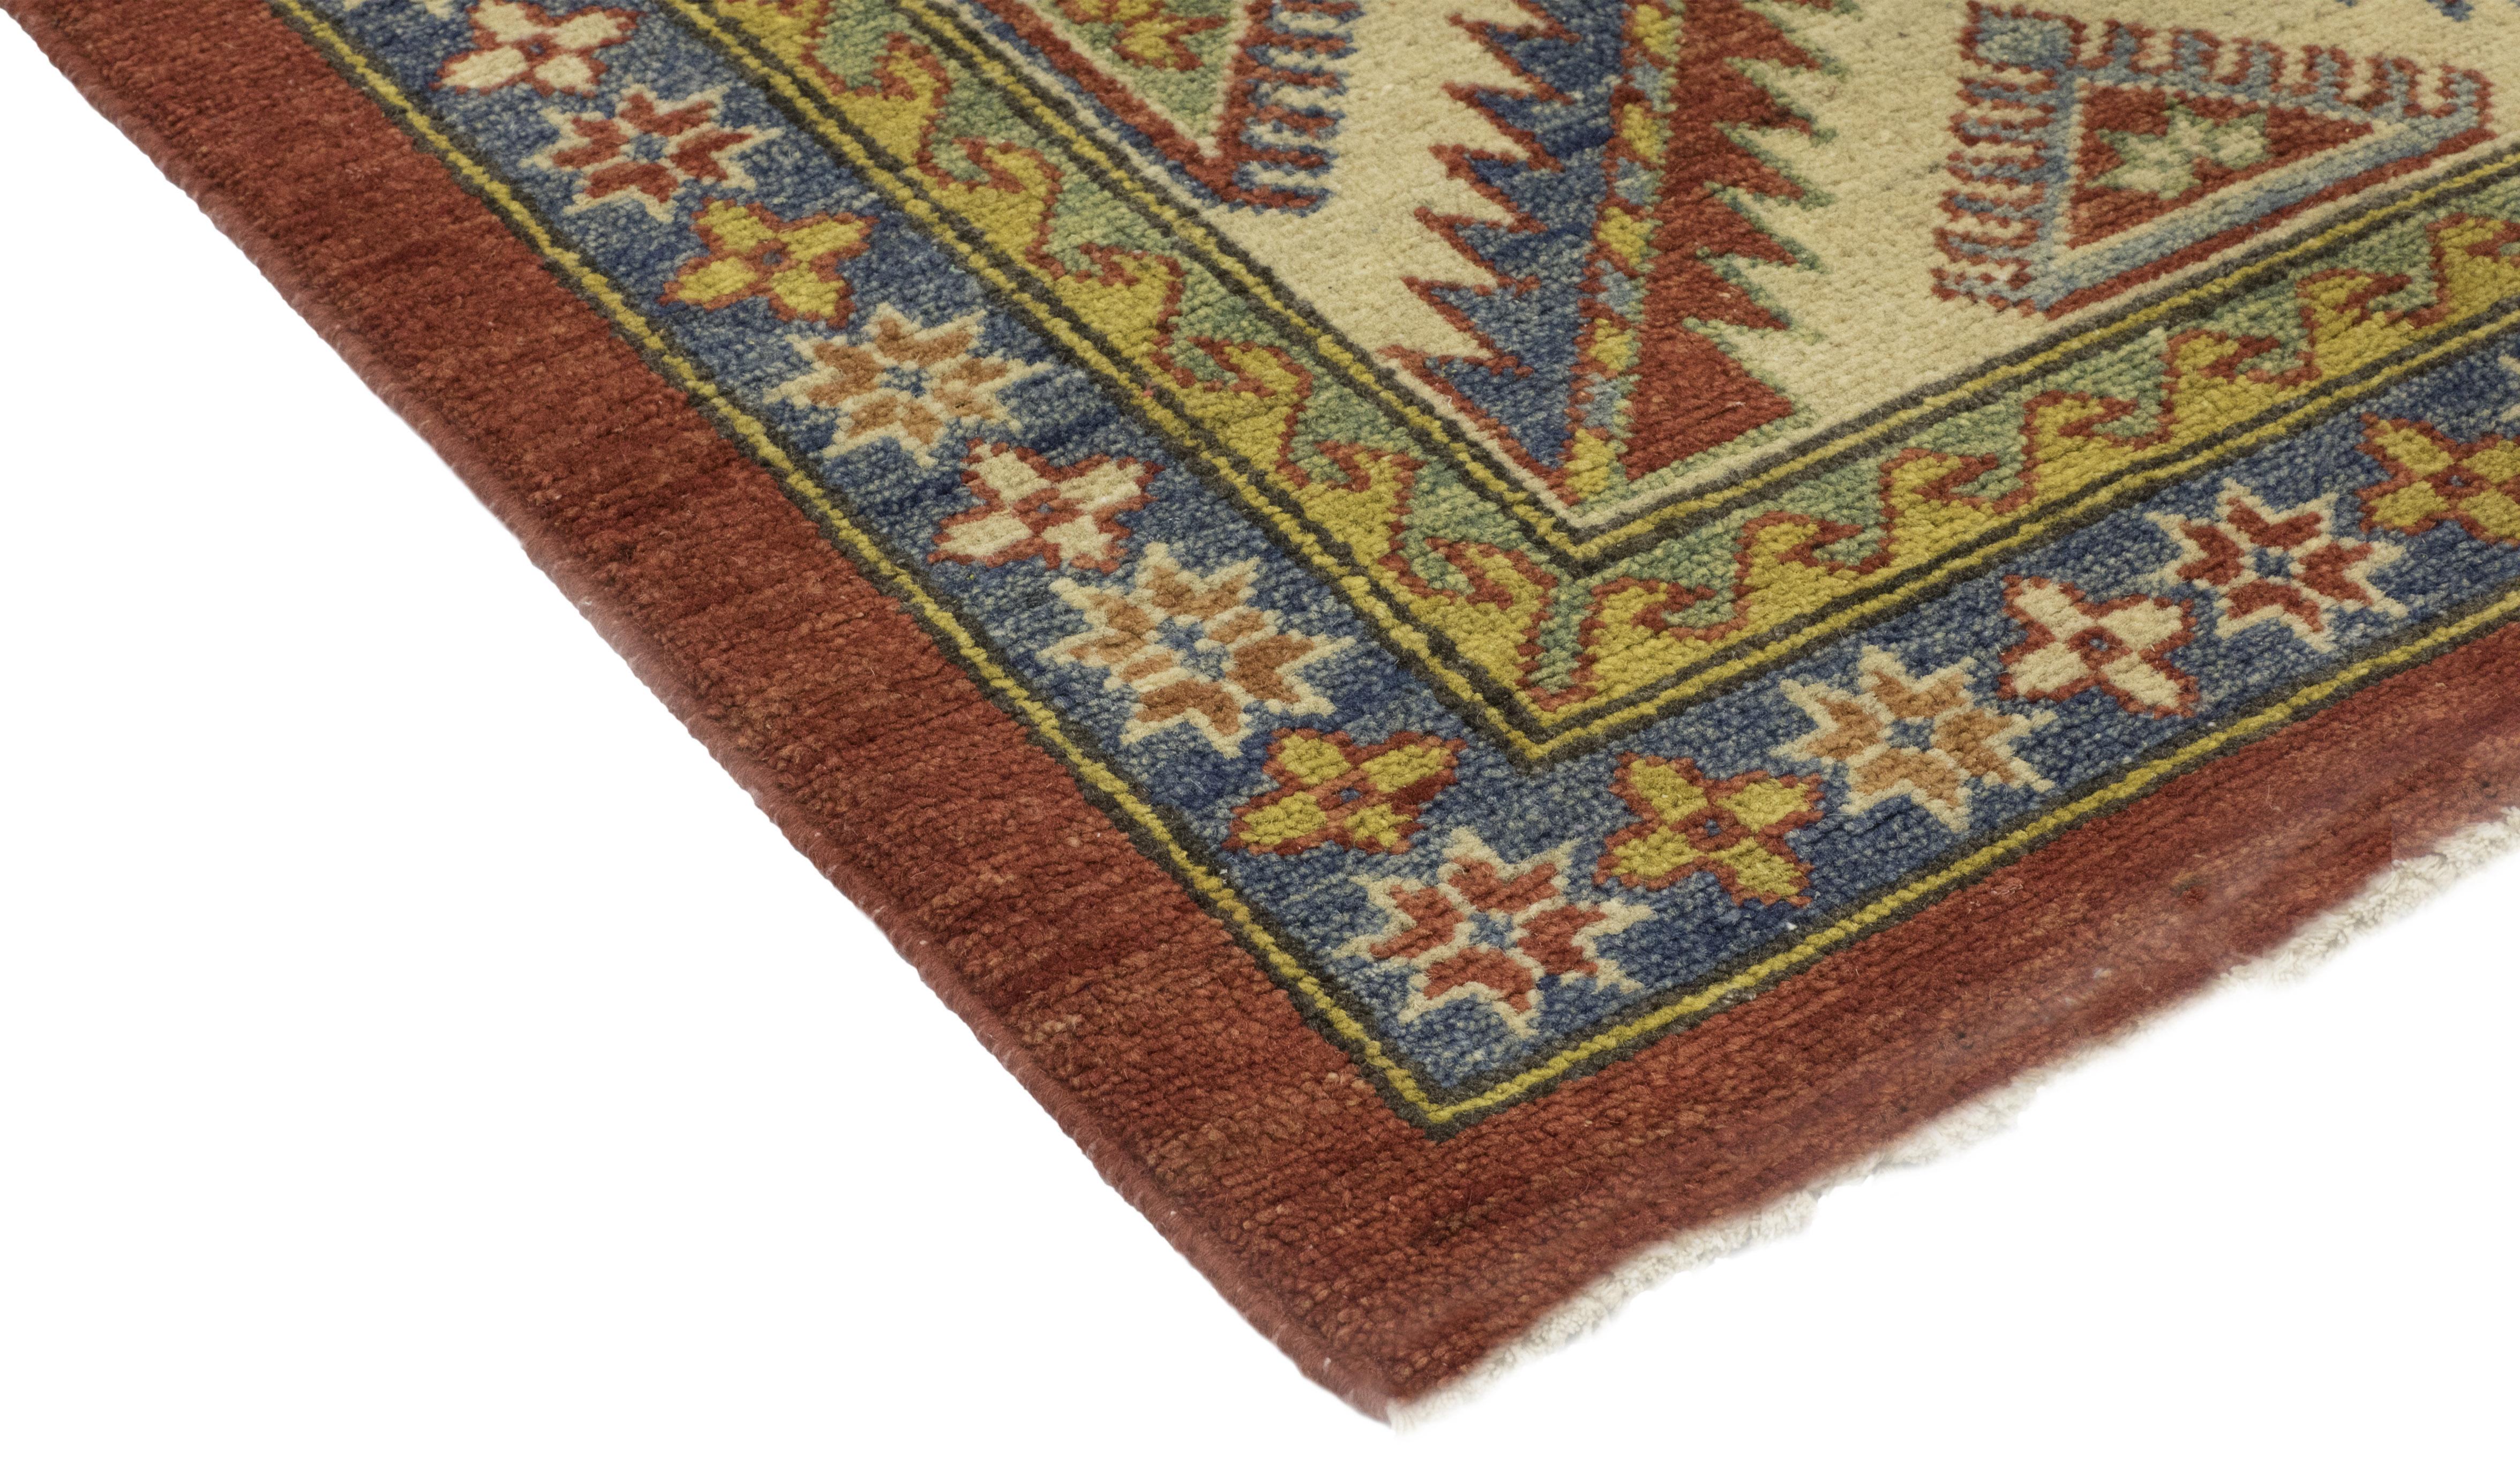 Color: Red - Made in: Pakistan. 100% wool, measures: 11 x 15' 3. With their earthy palettes and geometric patterns, the hand knotted rugs of the Southwestern collection make beautiful additions to rustic and lodge-style rooms. At the same time, they